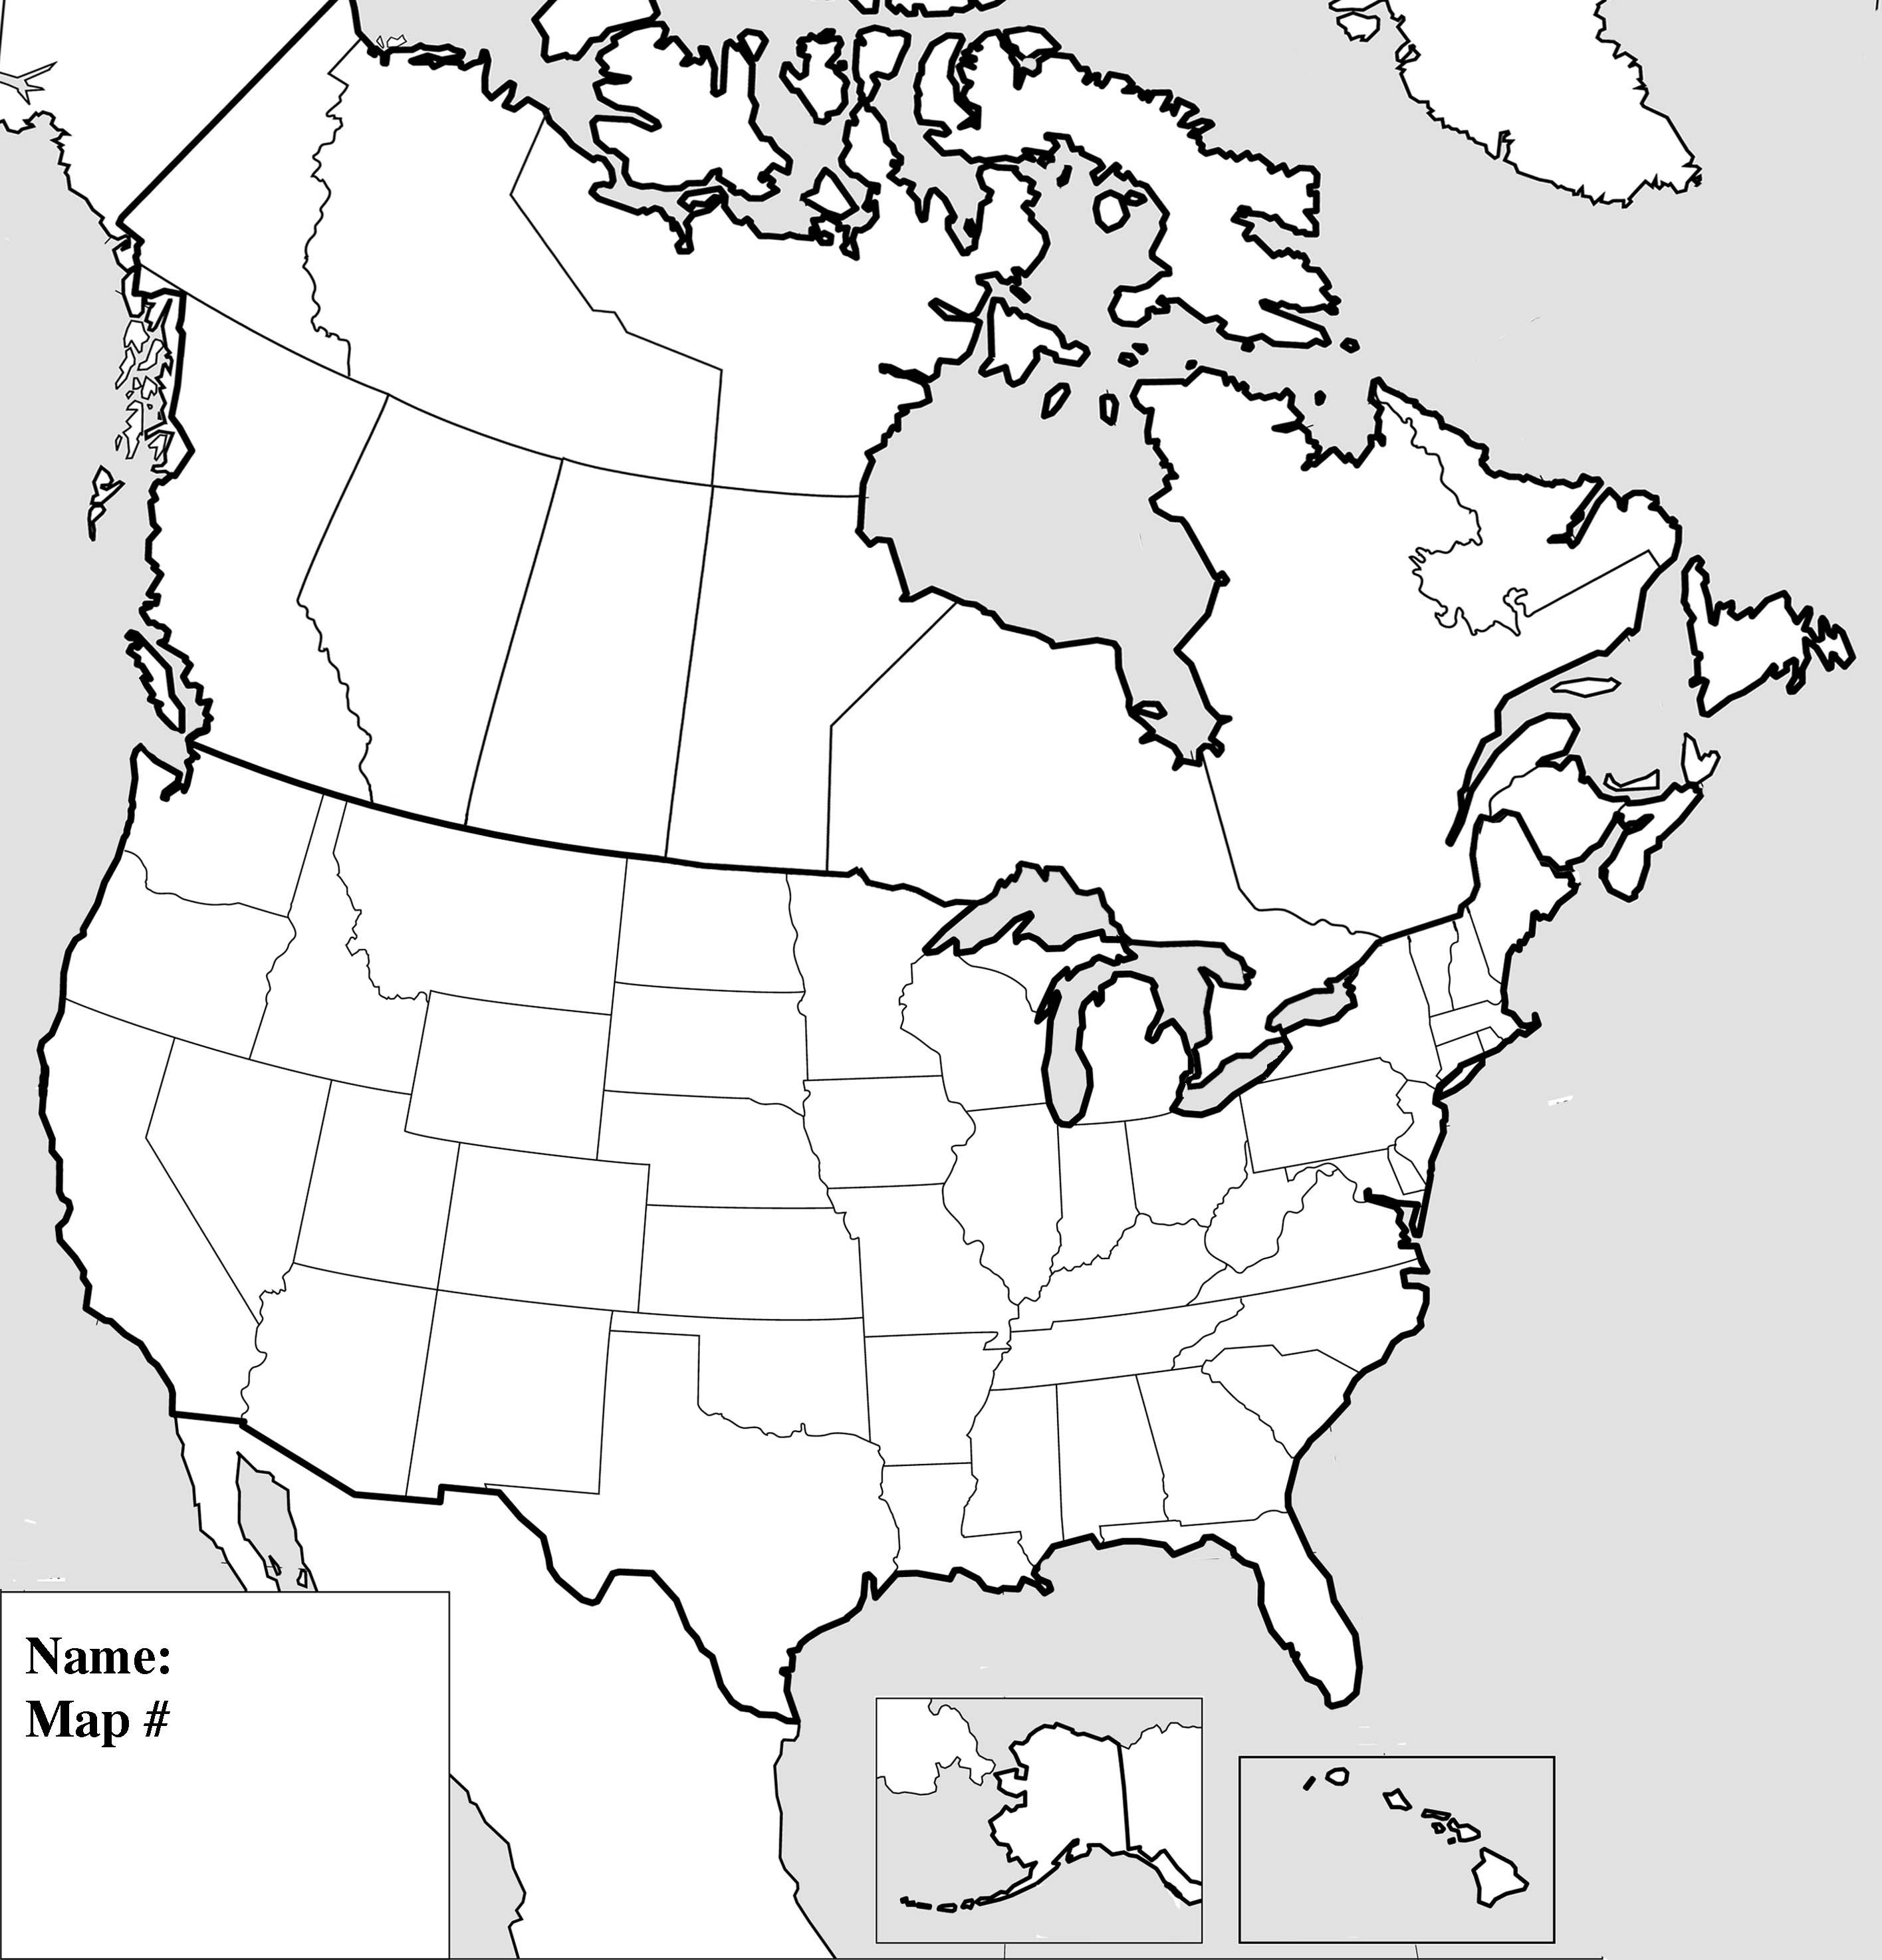 Printable Blank Outline Map Of The United States Unique Outline Map The United States America Save Map Us And Canada